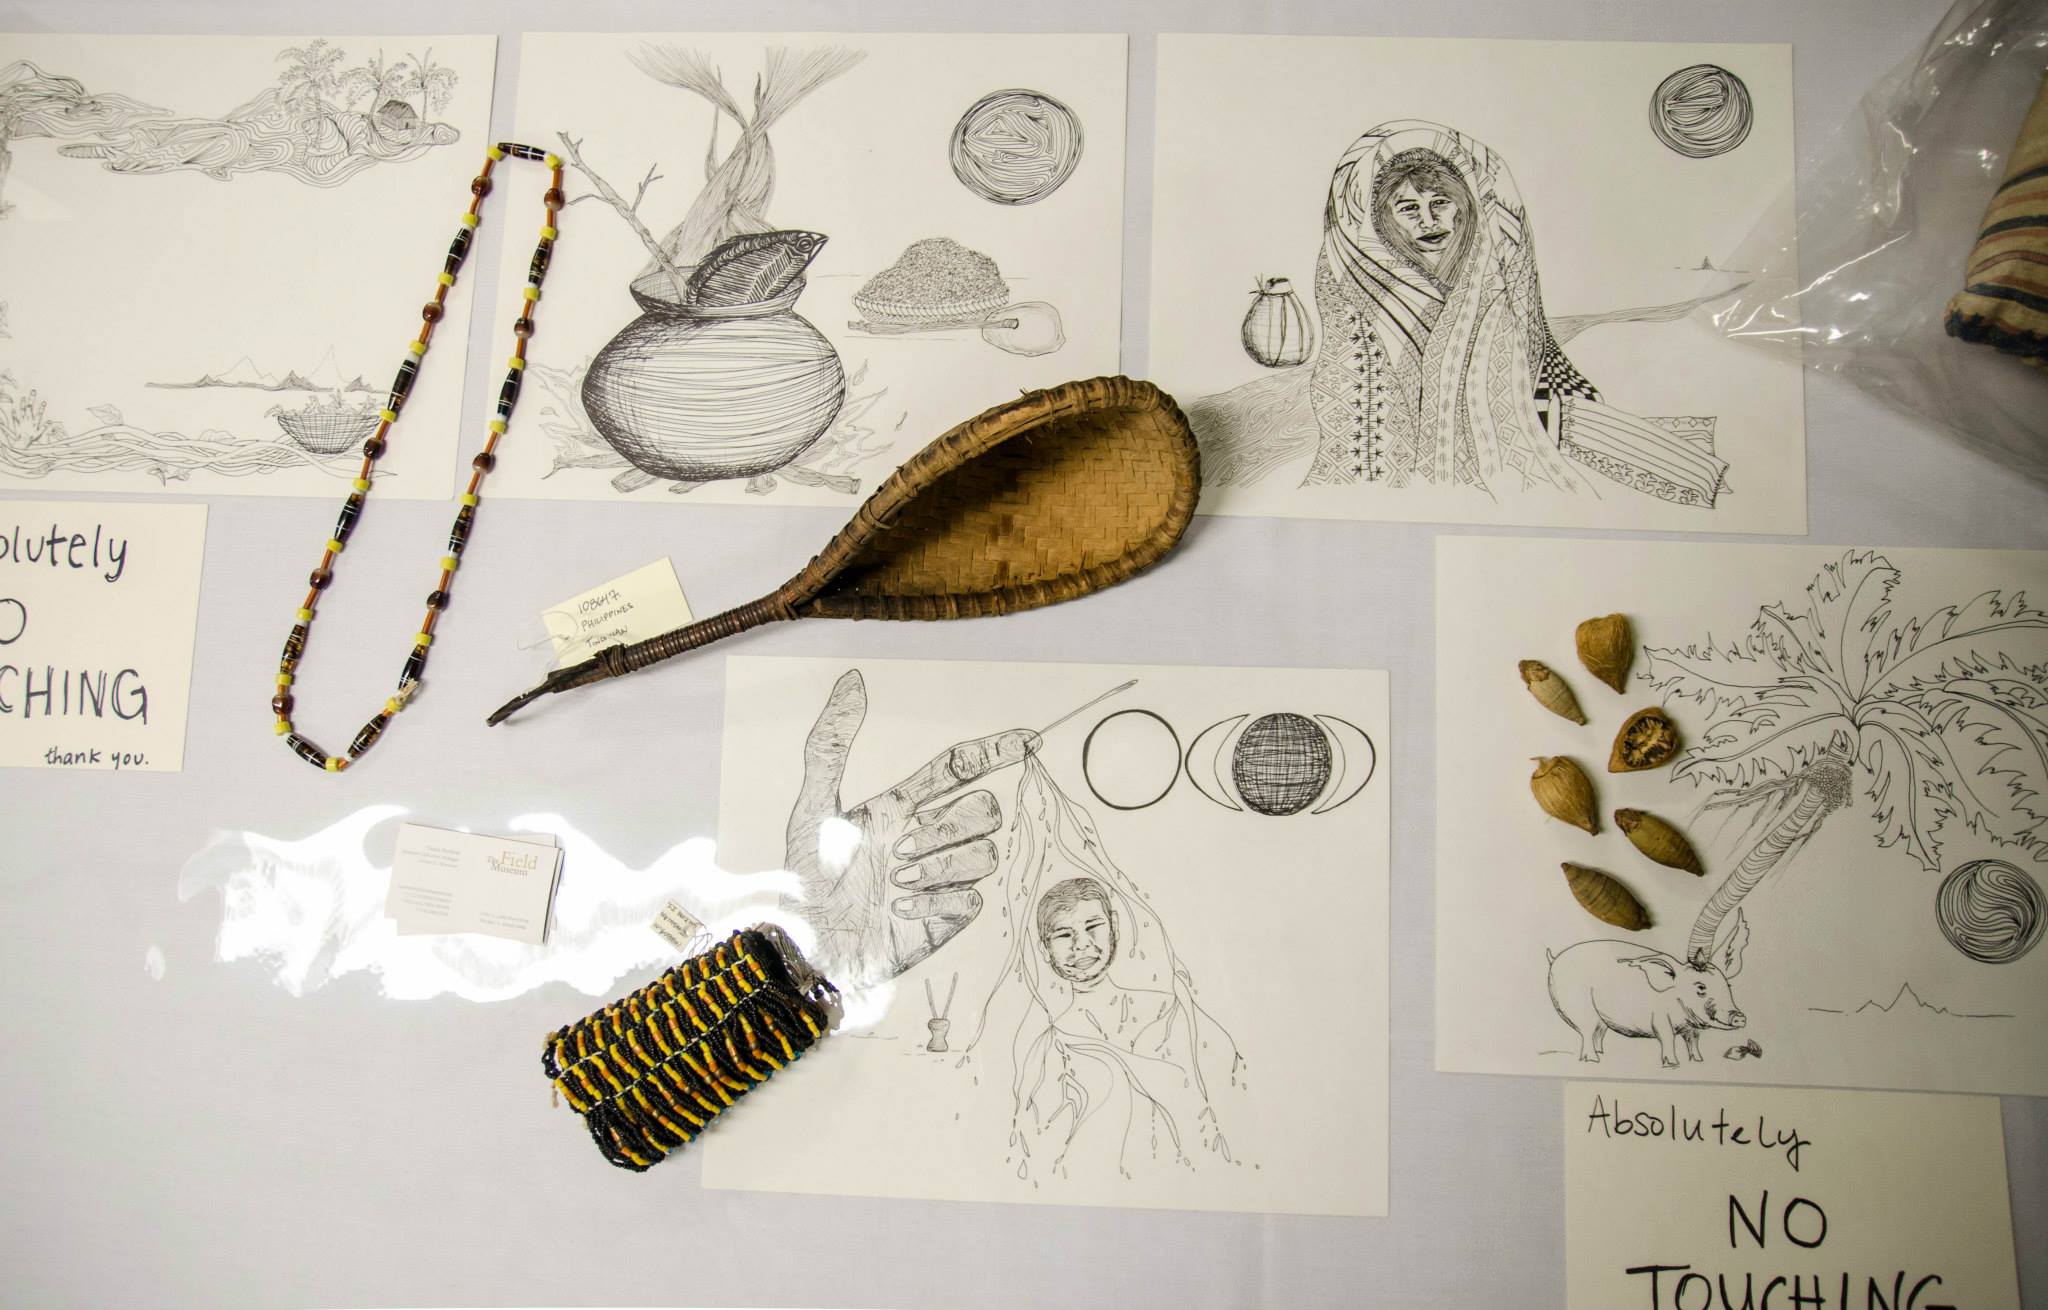 Artwork based upon the folktale, Aponibolinayen and the Sun, using Field Museum collections for reference. (c) Field Museum of Natural History - CC BY-NC 4.0